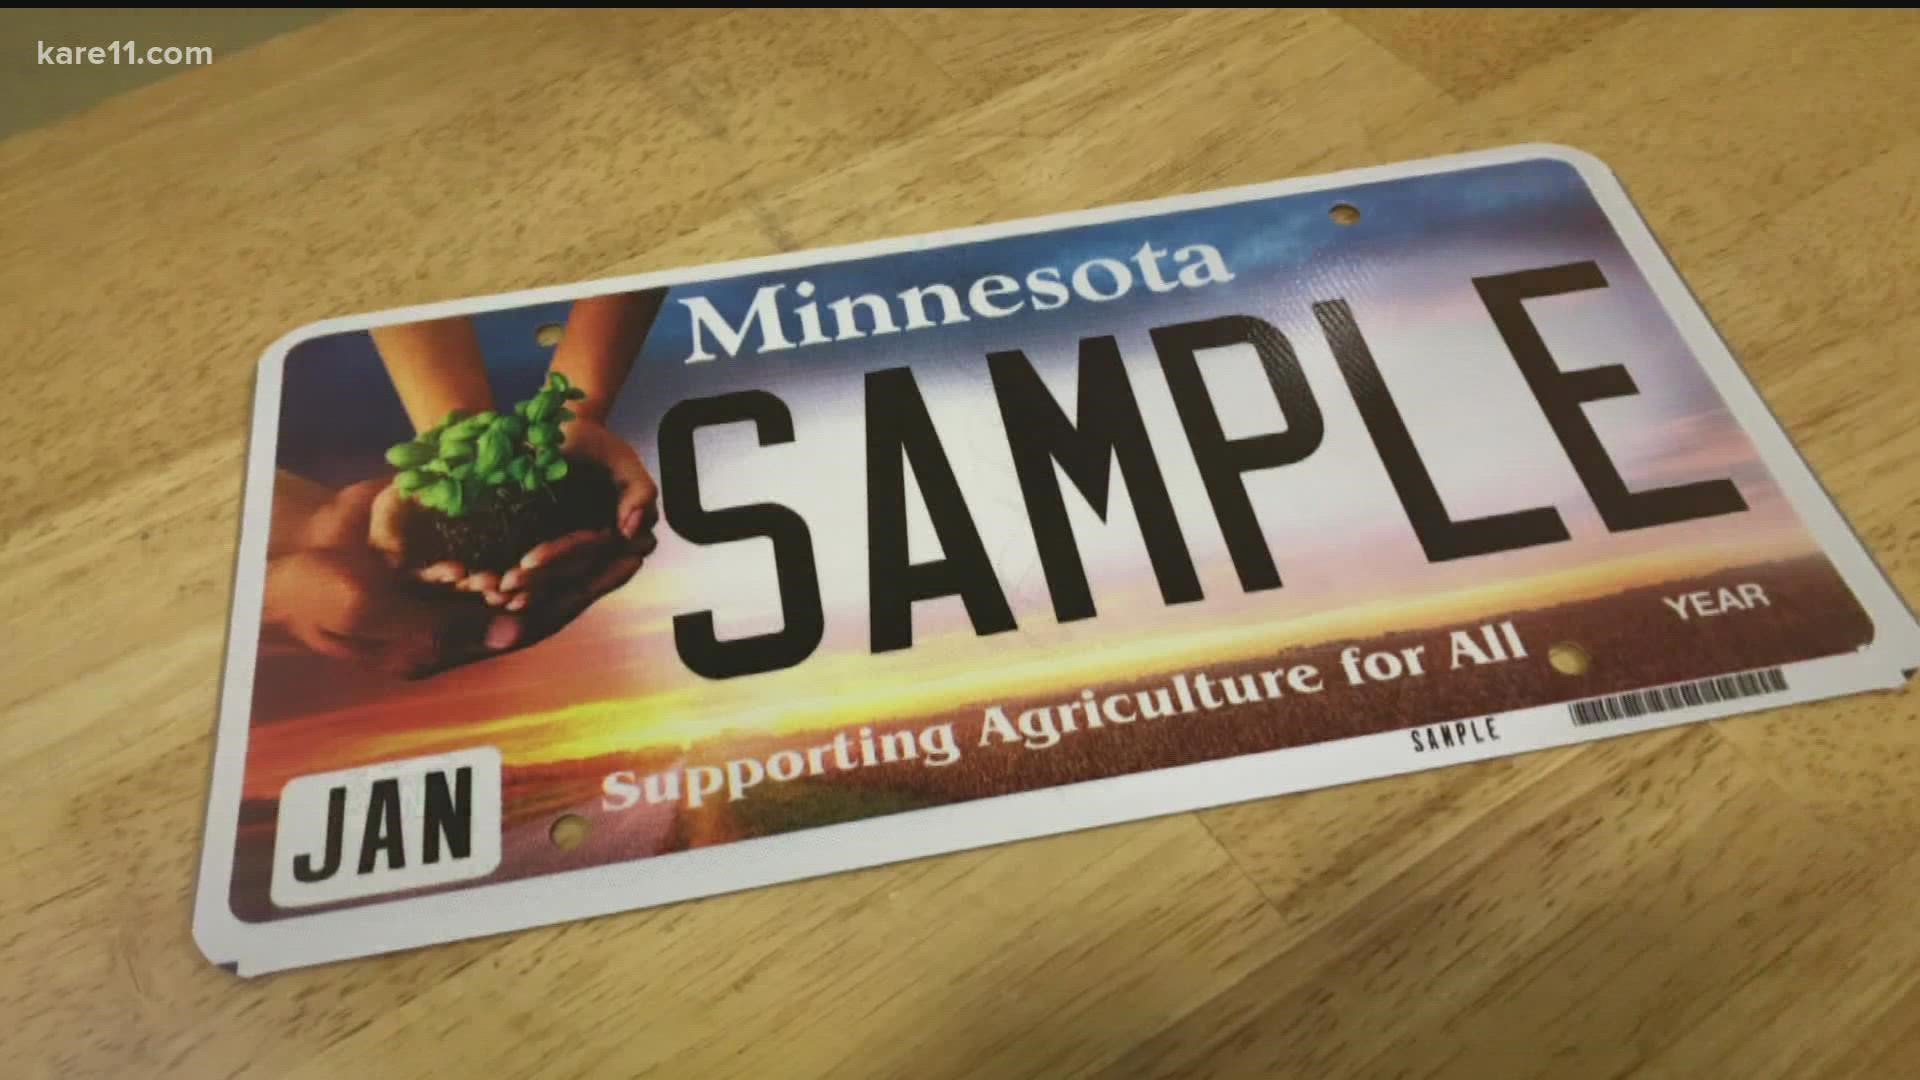 Minnesota car owners now have another option when it comes to license plates after the state issued a new one with an agricultural theme.